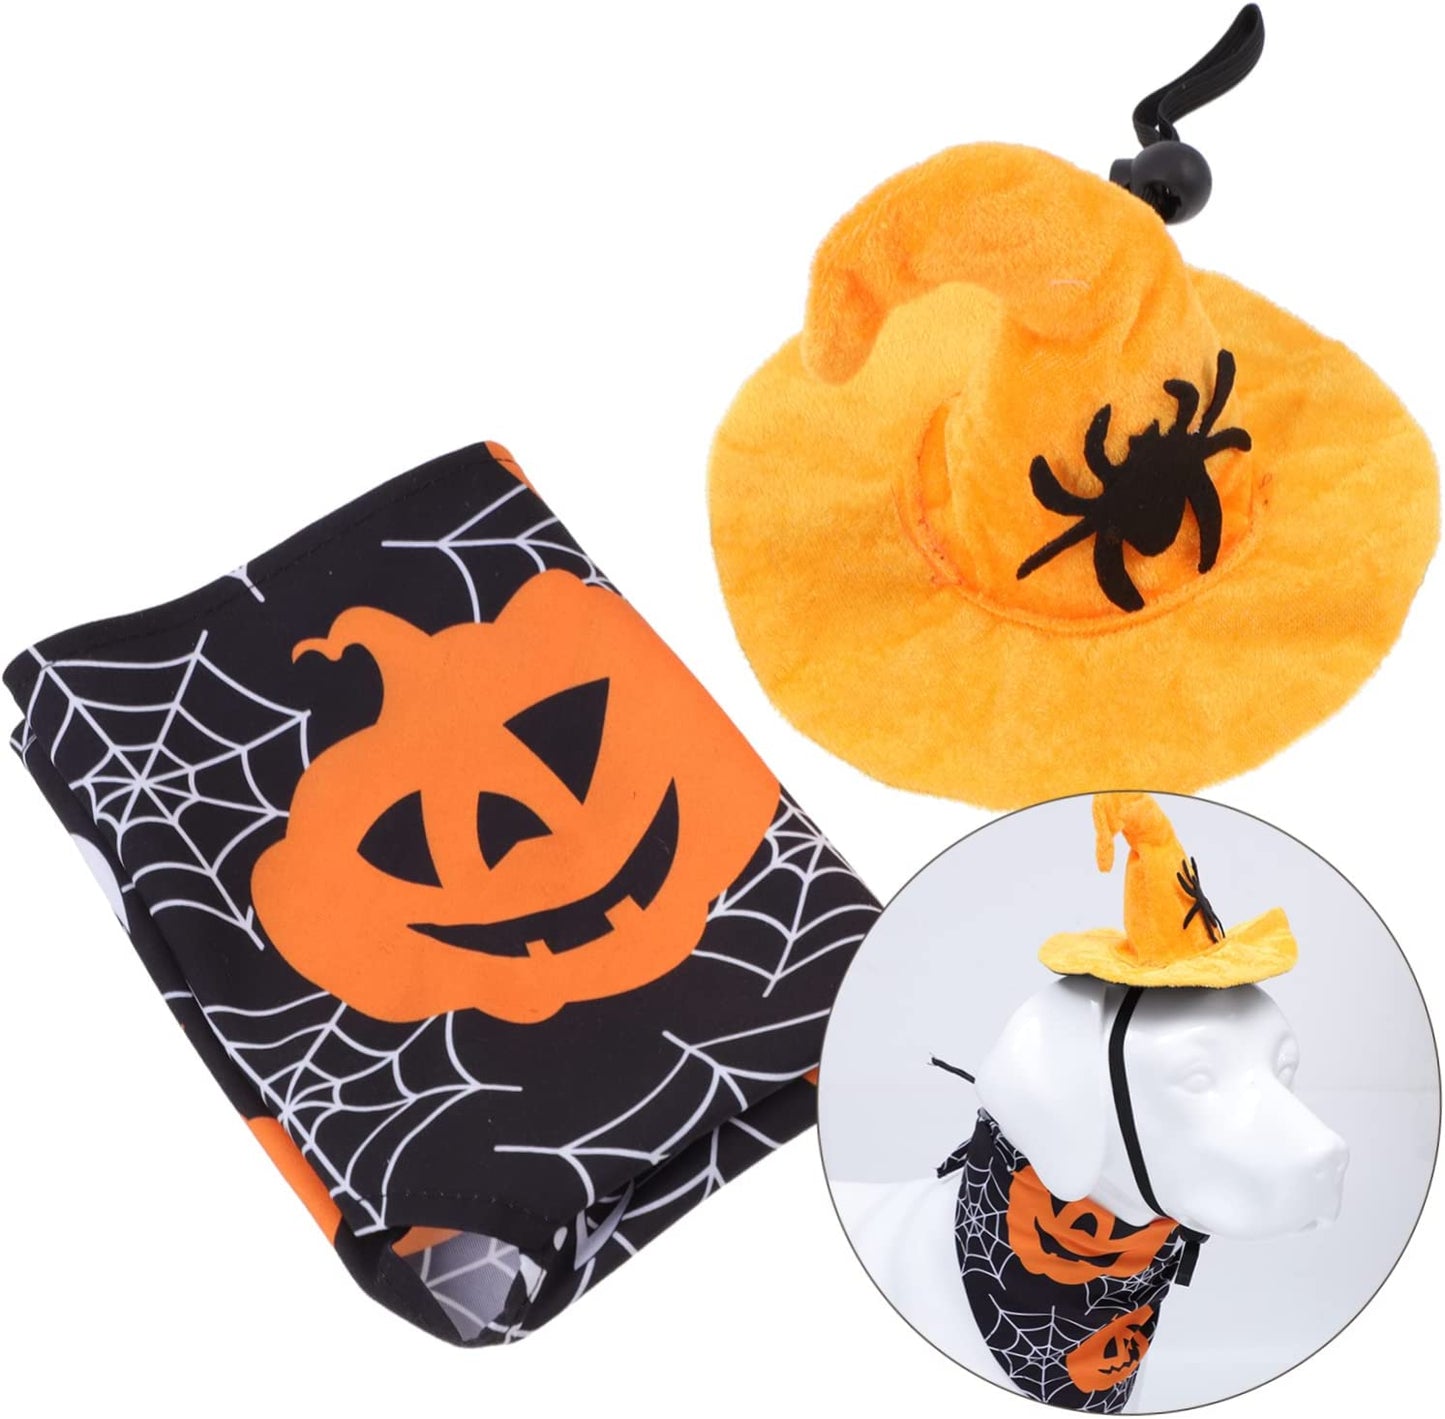 BCOATH 1 Set Large Medium Print Towel Adjustable Scarf Halloween Pet Decoration Scary Pets and Puppy Ornament Party Kit for Cats Witch Cat Bib Bandana Funny Triangle with Hat Dog Pumpkin